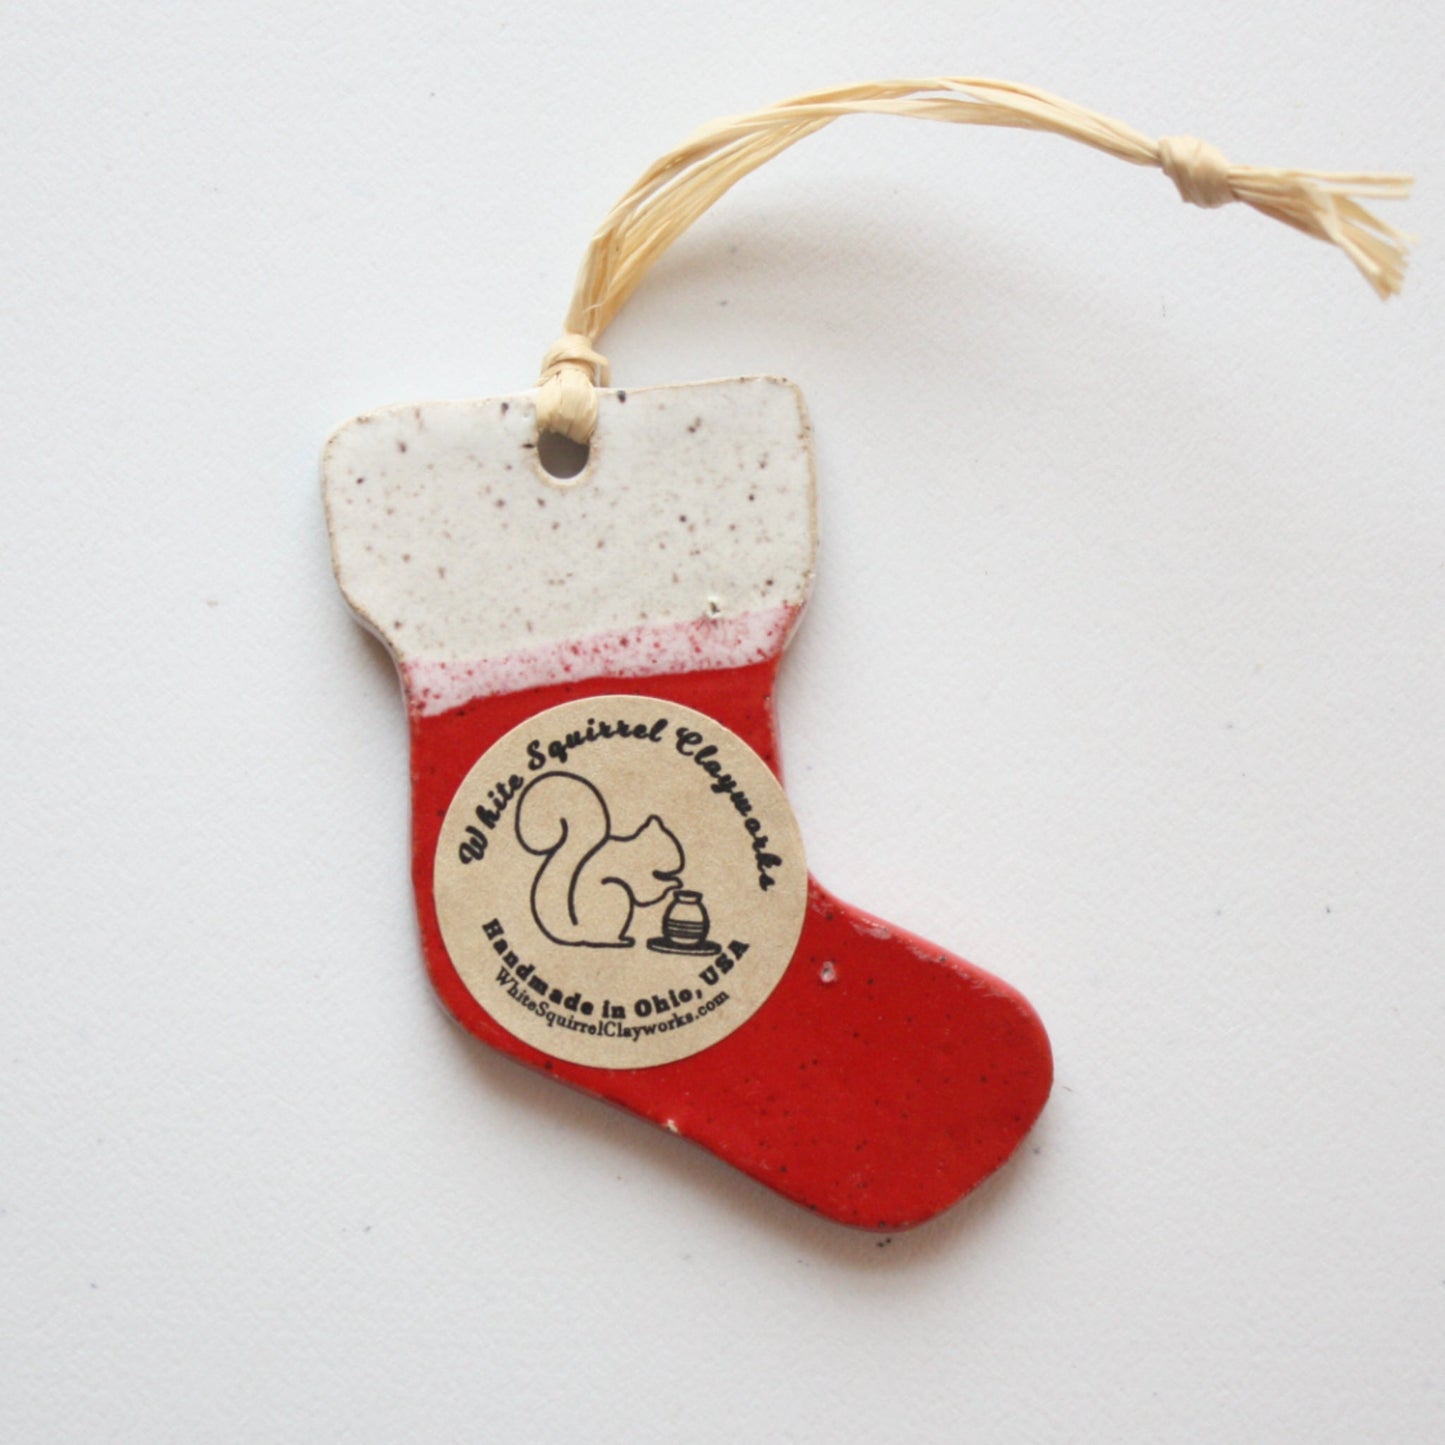 Handmade Ceramic Stocking Ornaments - Made in the USA